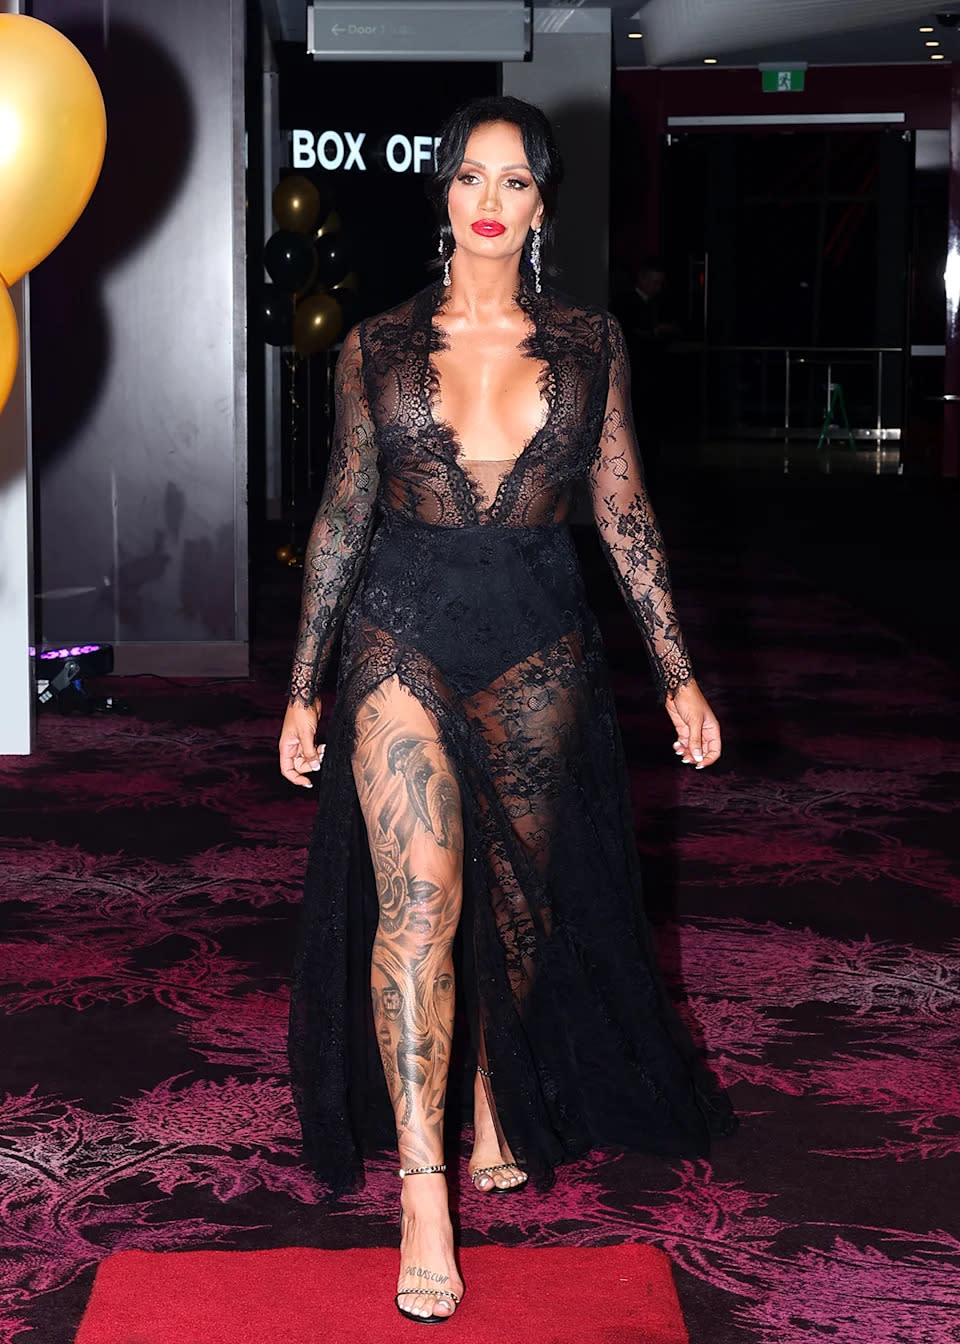 MAFS' Hayley Vernon arriving at The Adult Industry Choice Awards.